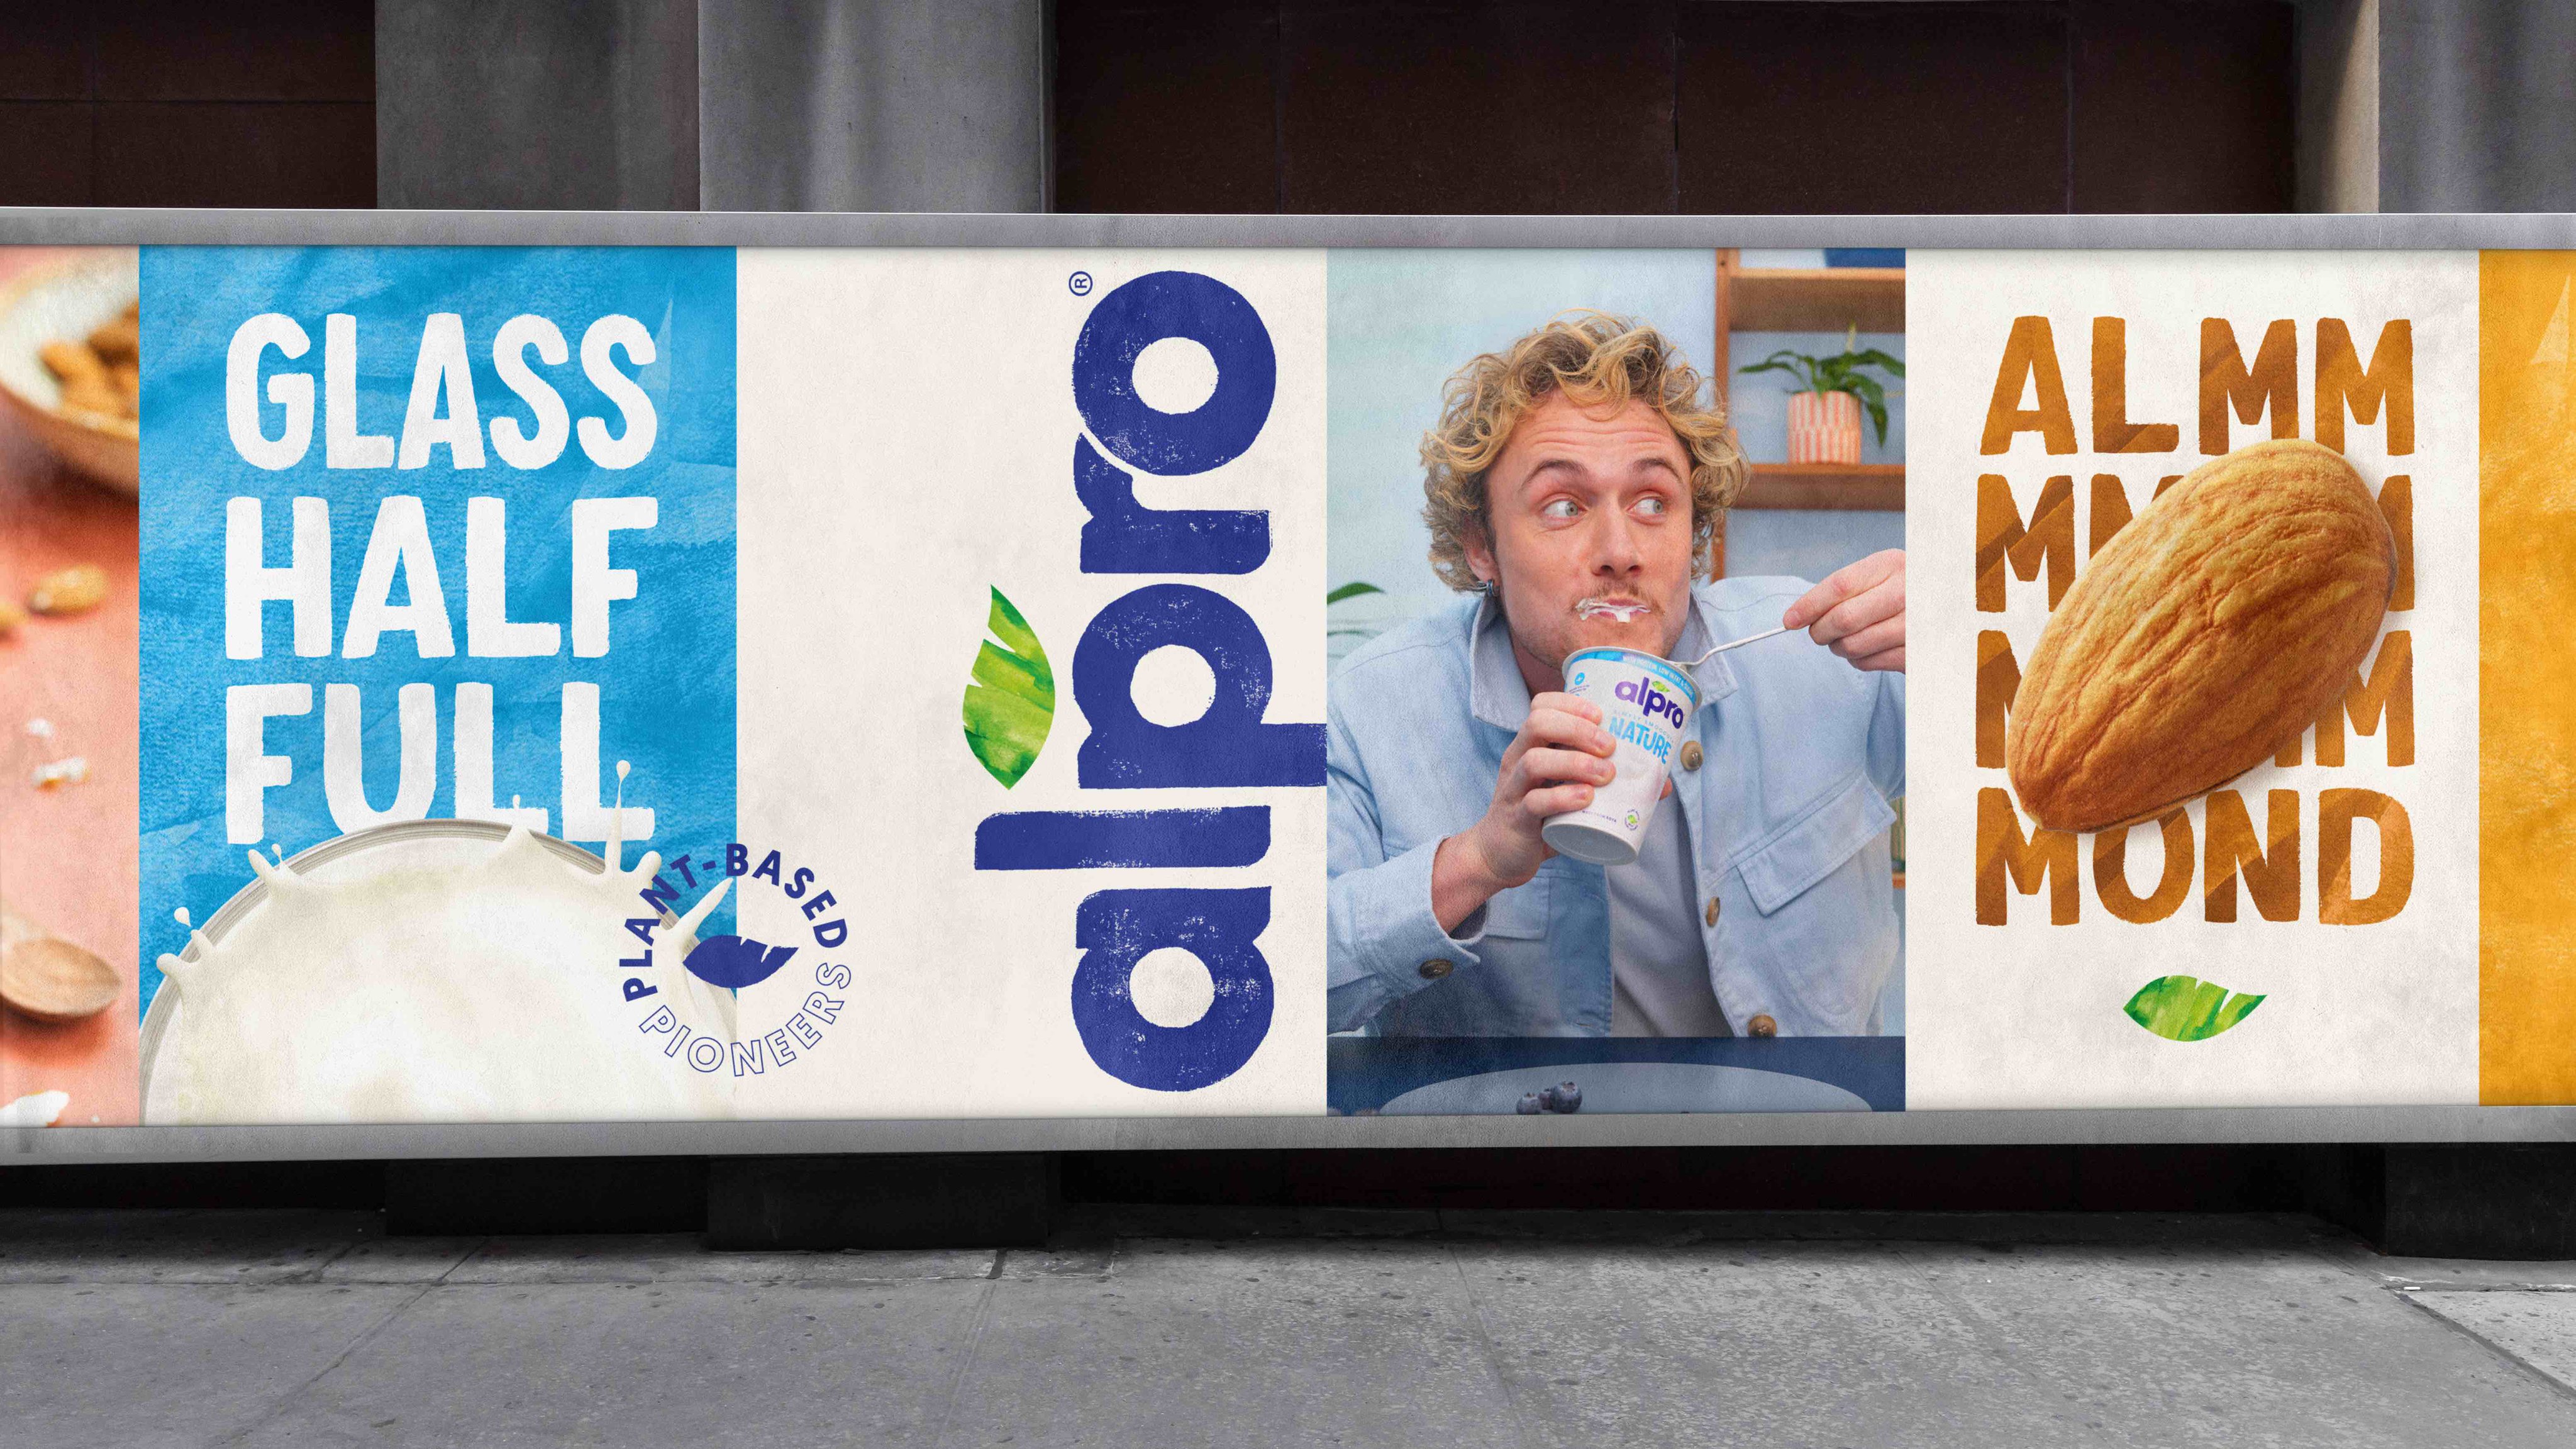 Danone on X: Plant-based pioneer @Alpro makes the perfect Barista